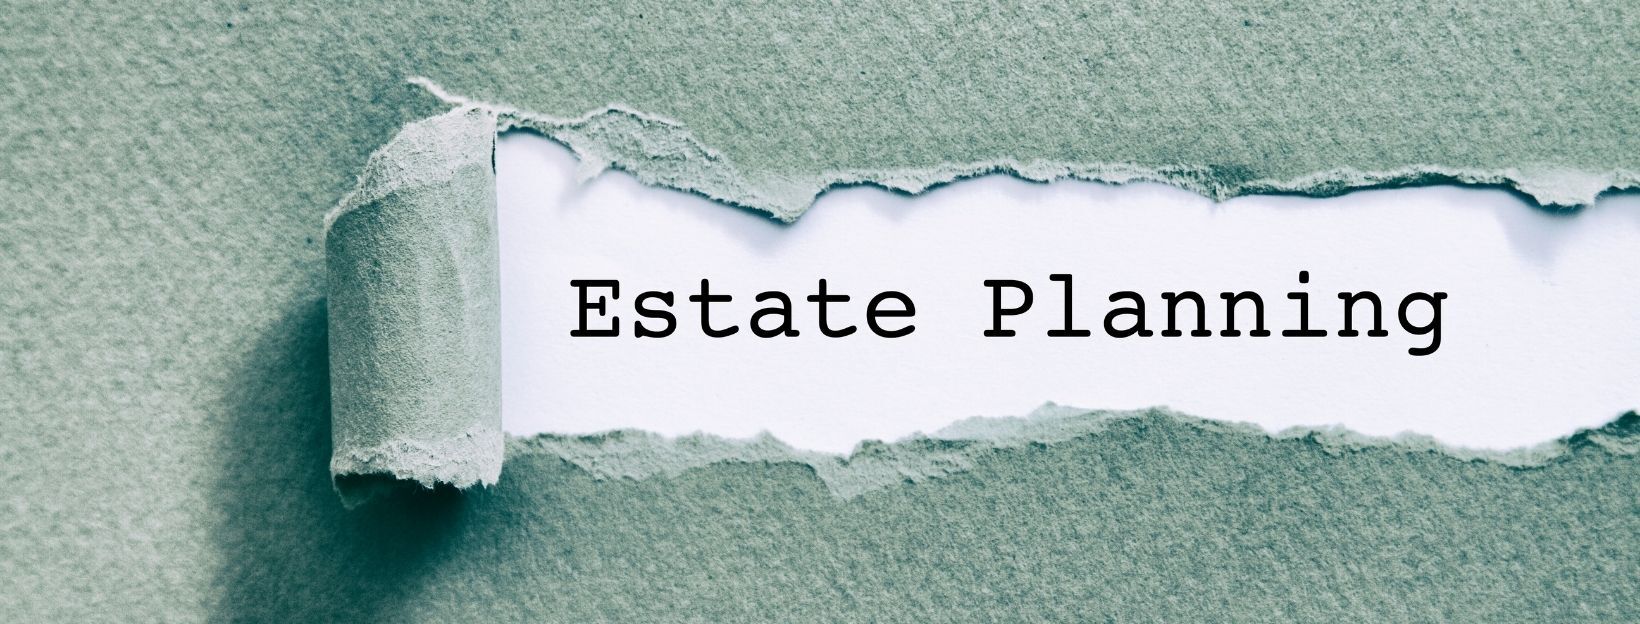 A Senior's Guide to Estate Planning